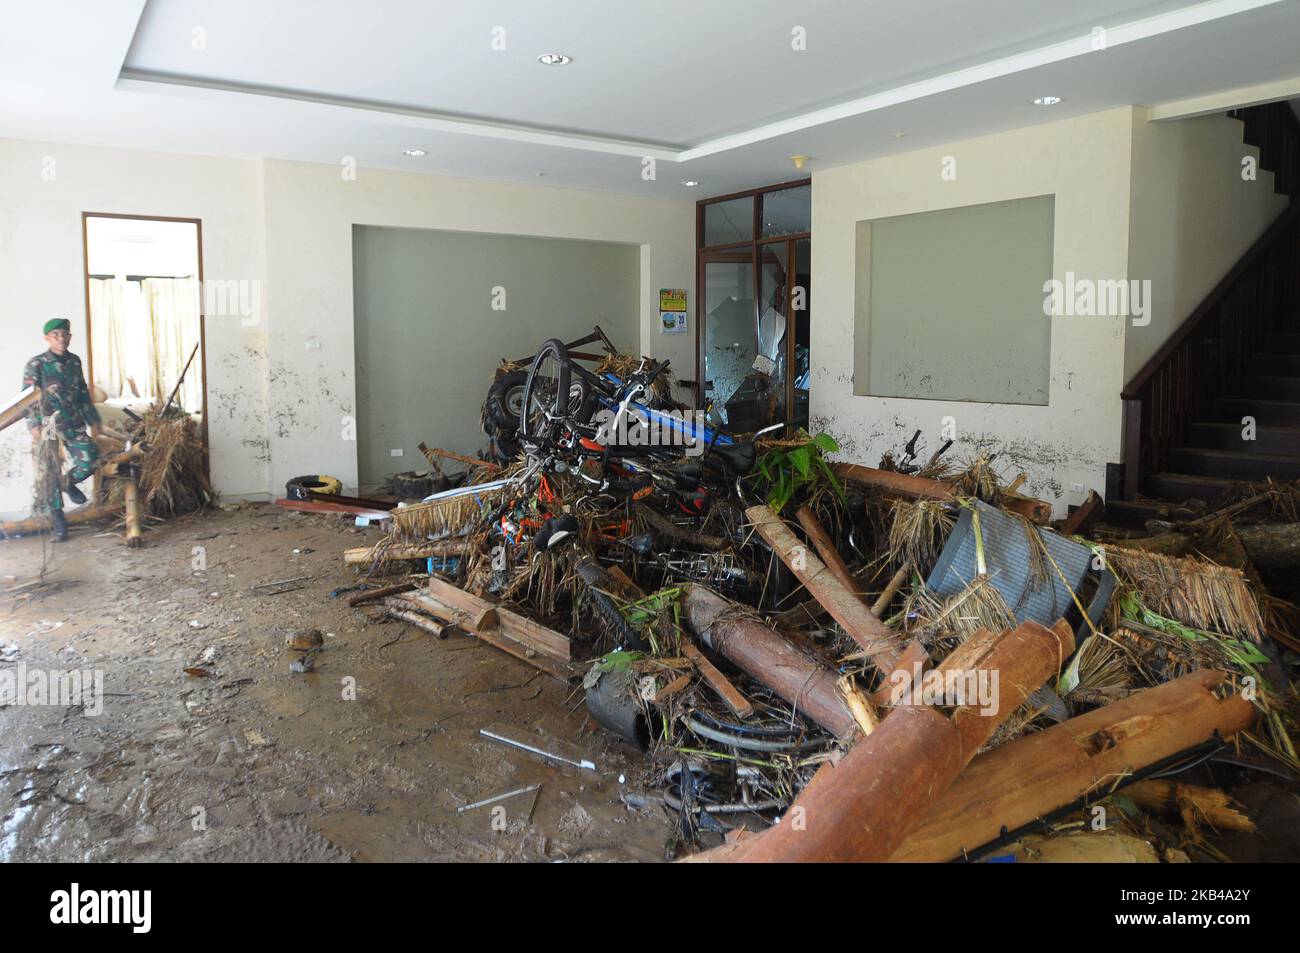 Tanjung Lesung Resort Beach Hotel which was destroyed by the Tsunami in Tanjung Lesung, Indonesia, Monday, December 24, 2018. Dozens of tsunami victims died and destroyed a music program on Saturday 22 December which is still being searched. Dasril Roszandi (Photo by Dasril Roszandi/NurPhoto) Stock Photo